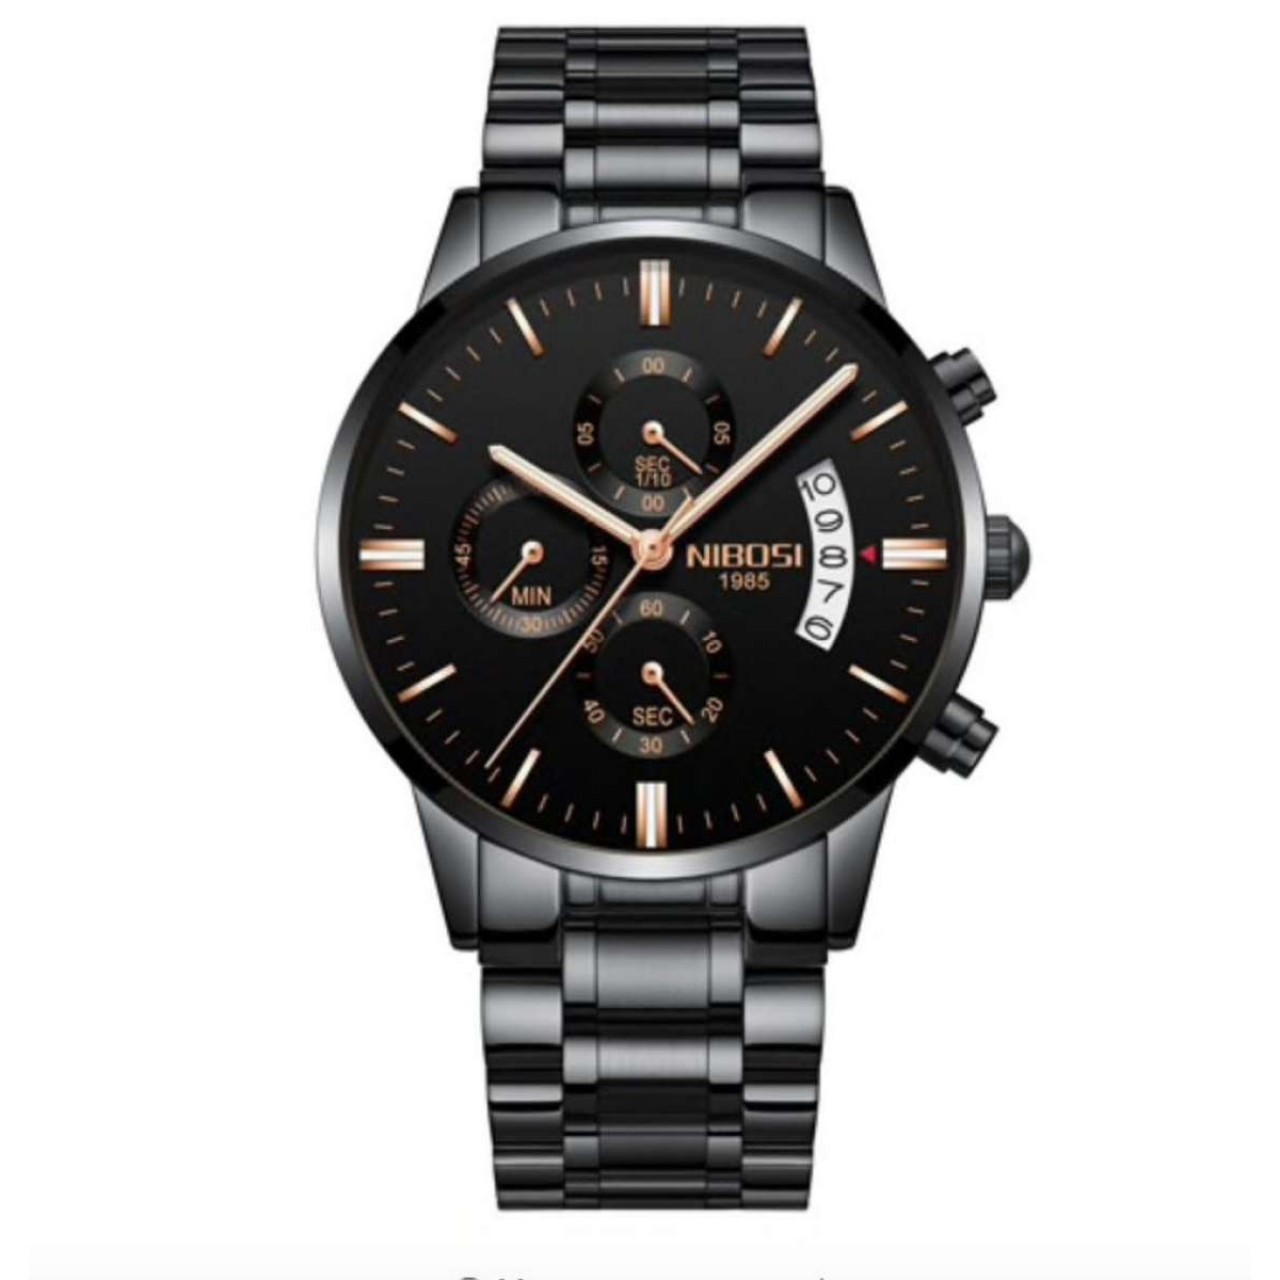 NIBOSI Luxury Watches Famous Top Brand Casual Dress Watch - Military Quartz Wristwatches for MEN